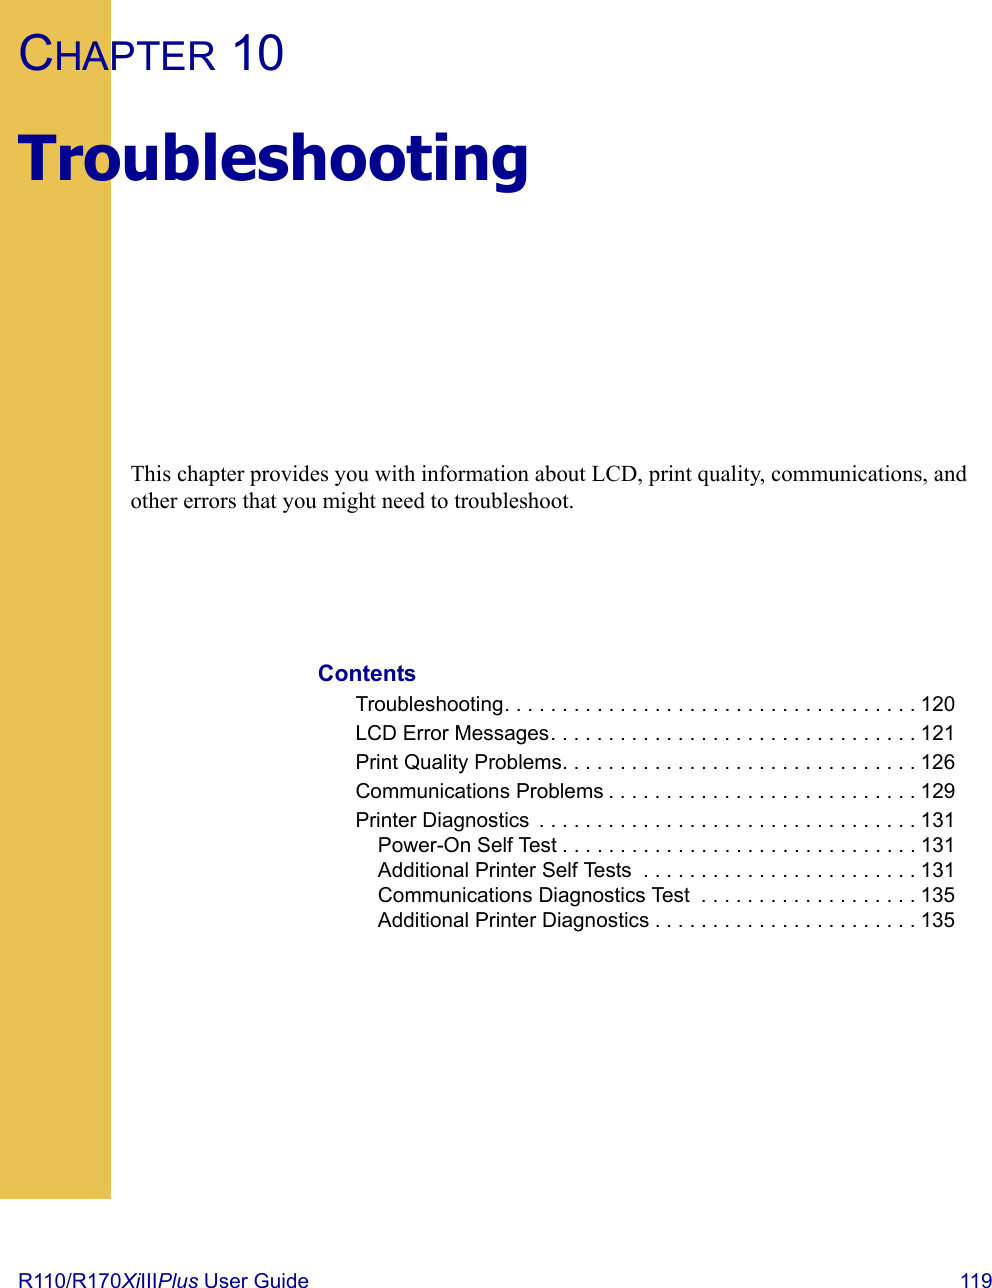 R110/R170XiIIIPlus User Guide  119CHAPTER 10TroubleshootingThis chapter provides you with information about LCD, print quality, communications, and other errors that you might need to troubleshoot.ContentsTroubleshooting. . . . . . . . . . . . . . . . . . . . . . . . . . . . . . . . . . . . 120LCD Error Messages. . . . . . . . . . . . . . . . . . . . . . . . . . . . . . . . 121Print Quality Problems. . . . . . . . . . . . . . . . . . . . . . . . . . . . . . . 126Communications Problems . . . . . . . . . . . . . . . . . . . . . . . . . . . 129Printer Diagnostics  . . . . . . . . . . . . . . . . . . . . . . . . . . . . . . . . . 131Power-On Self Test . . . . . . . . . . . . . . . . . . . . . . . . . . . . . . . 131Additional Printer Self Tests  . . . . . . . . . . . . . . . . . . . . . . . . 131Communications Diagnostics Test  . . . . . . . . . . . . . . . . . . . 135Additional Printer Diagnostics . . . . . . . . . . . . . . . . . . . . . . . 135